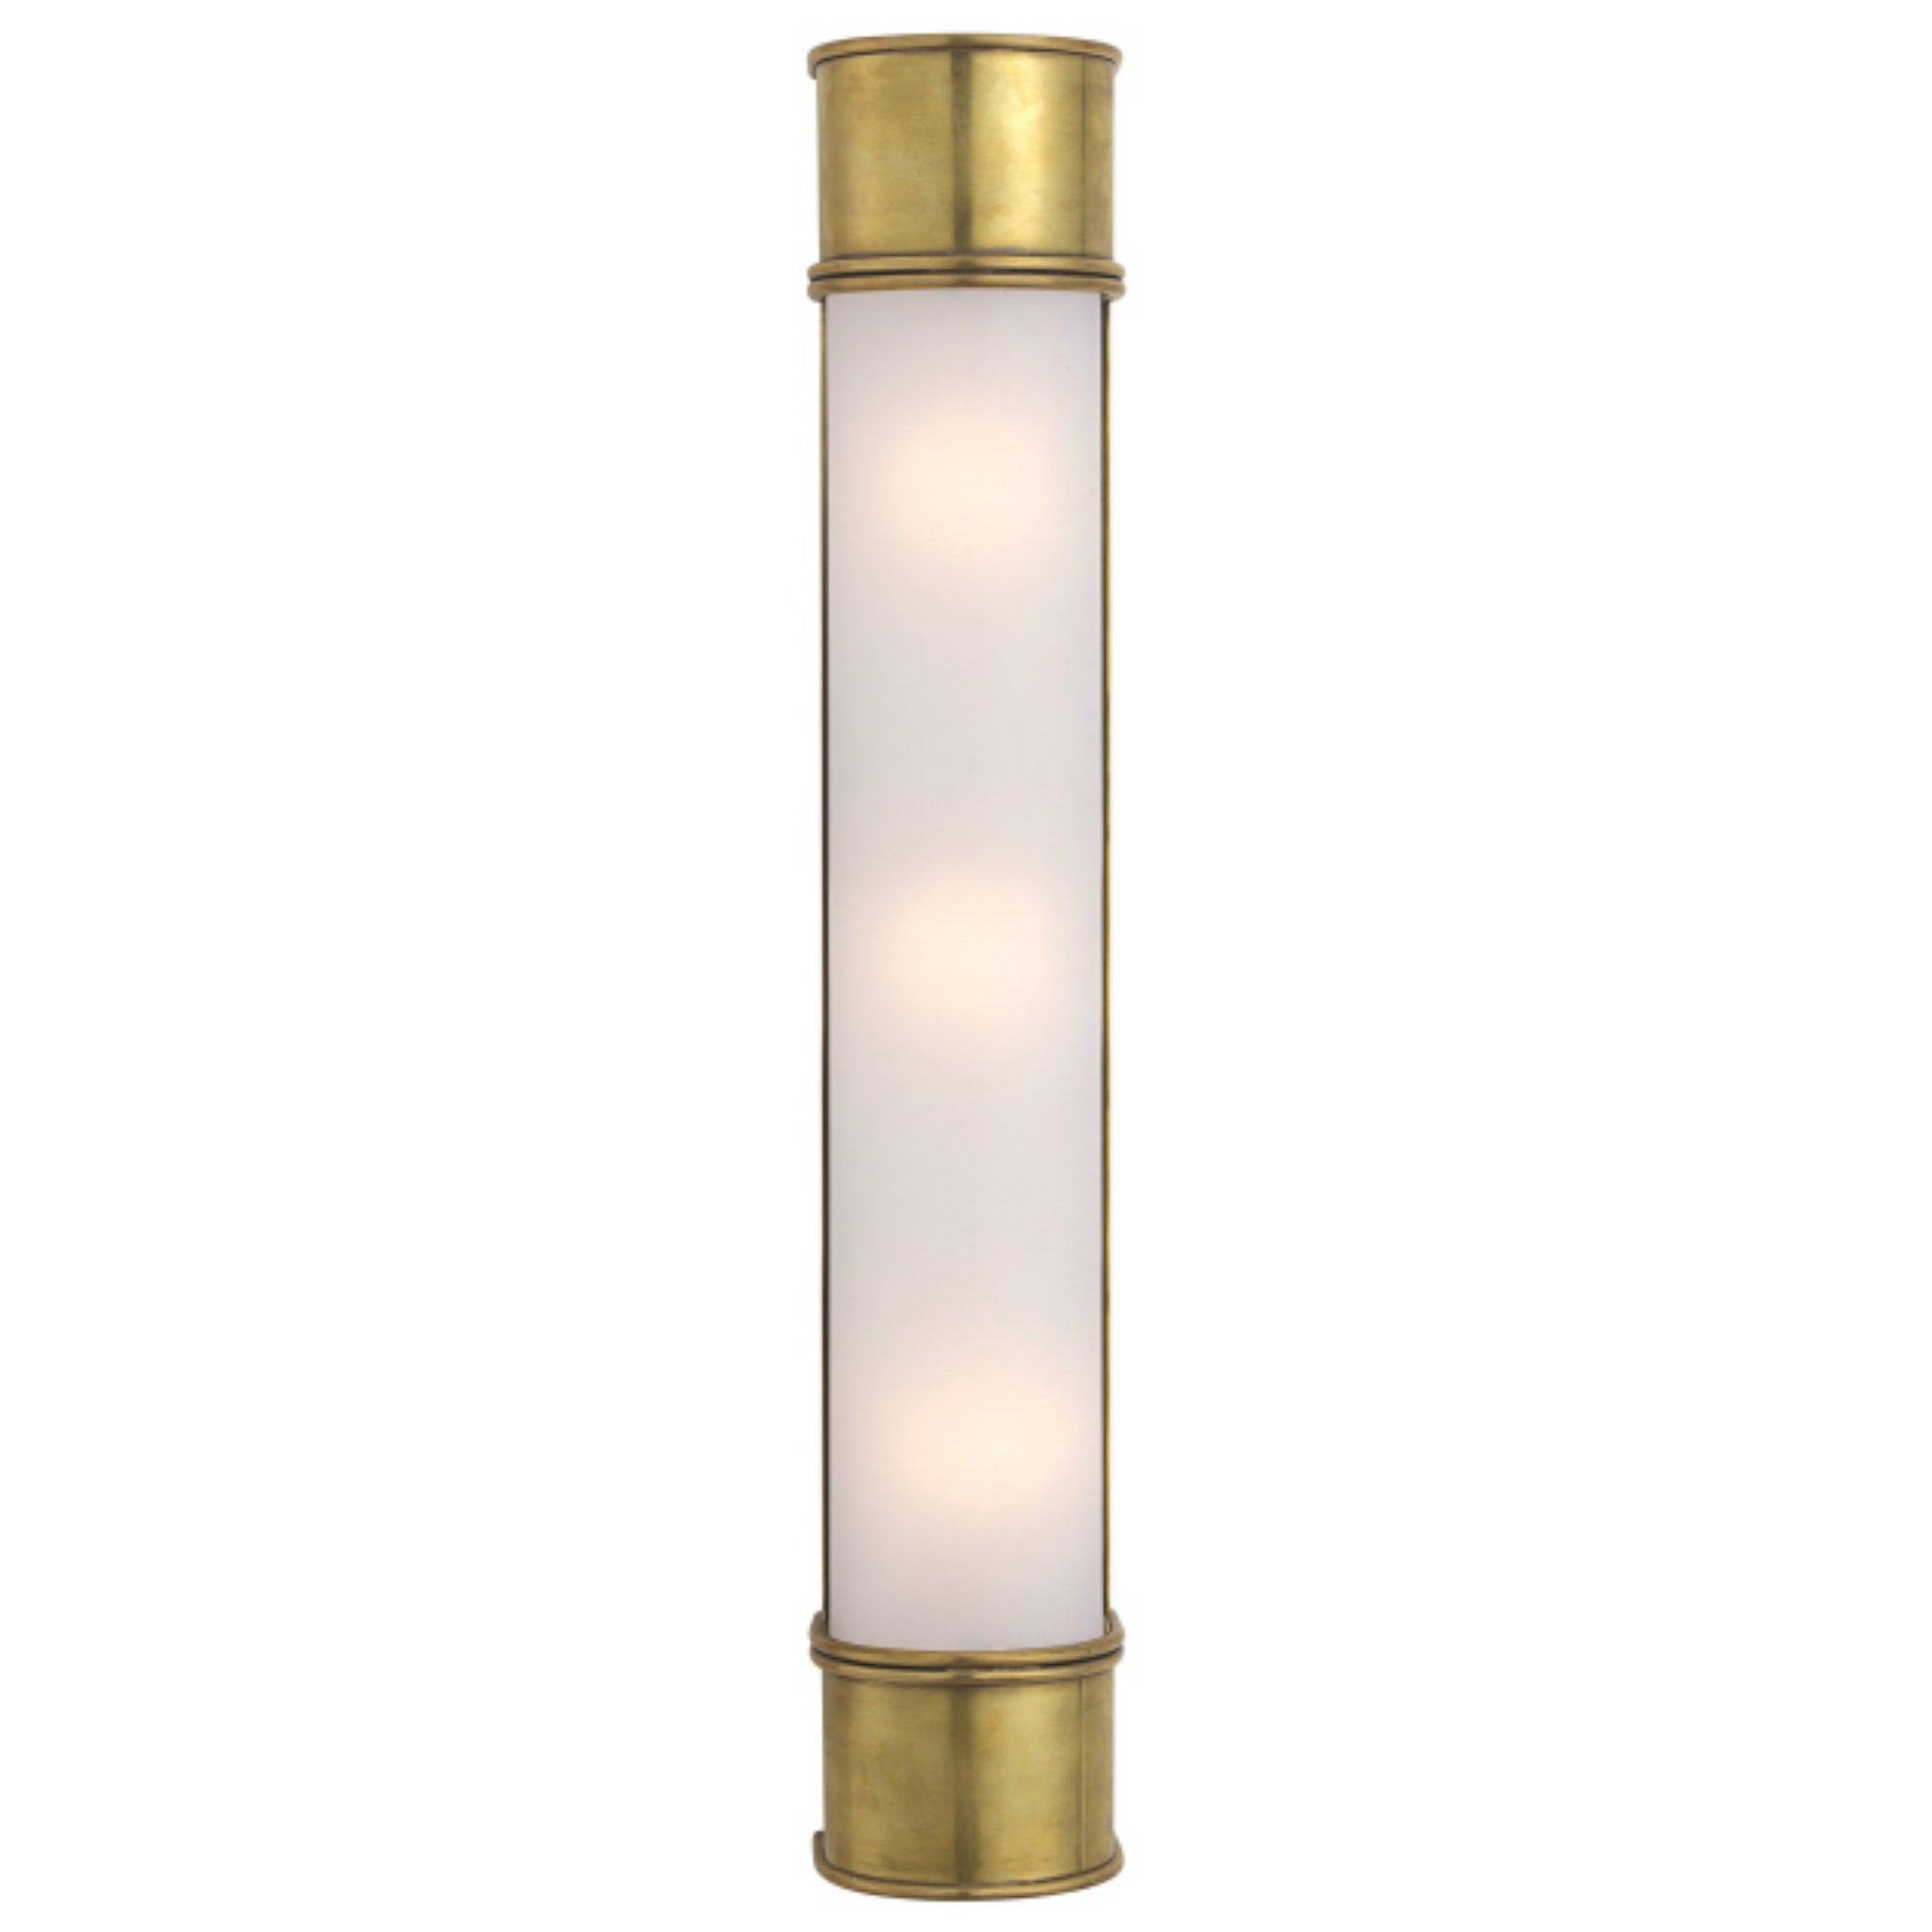 Chapman & Myers Oxford 24" Bath Sconce in Antique-Burnished Brass with Frosted Glass